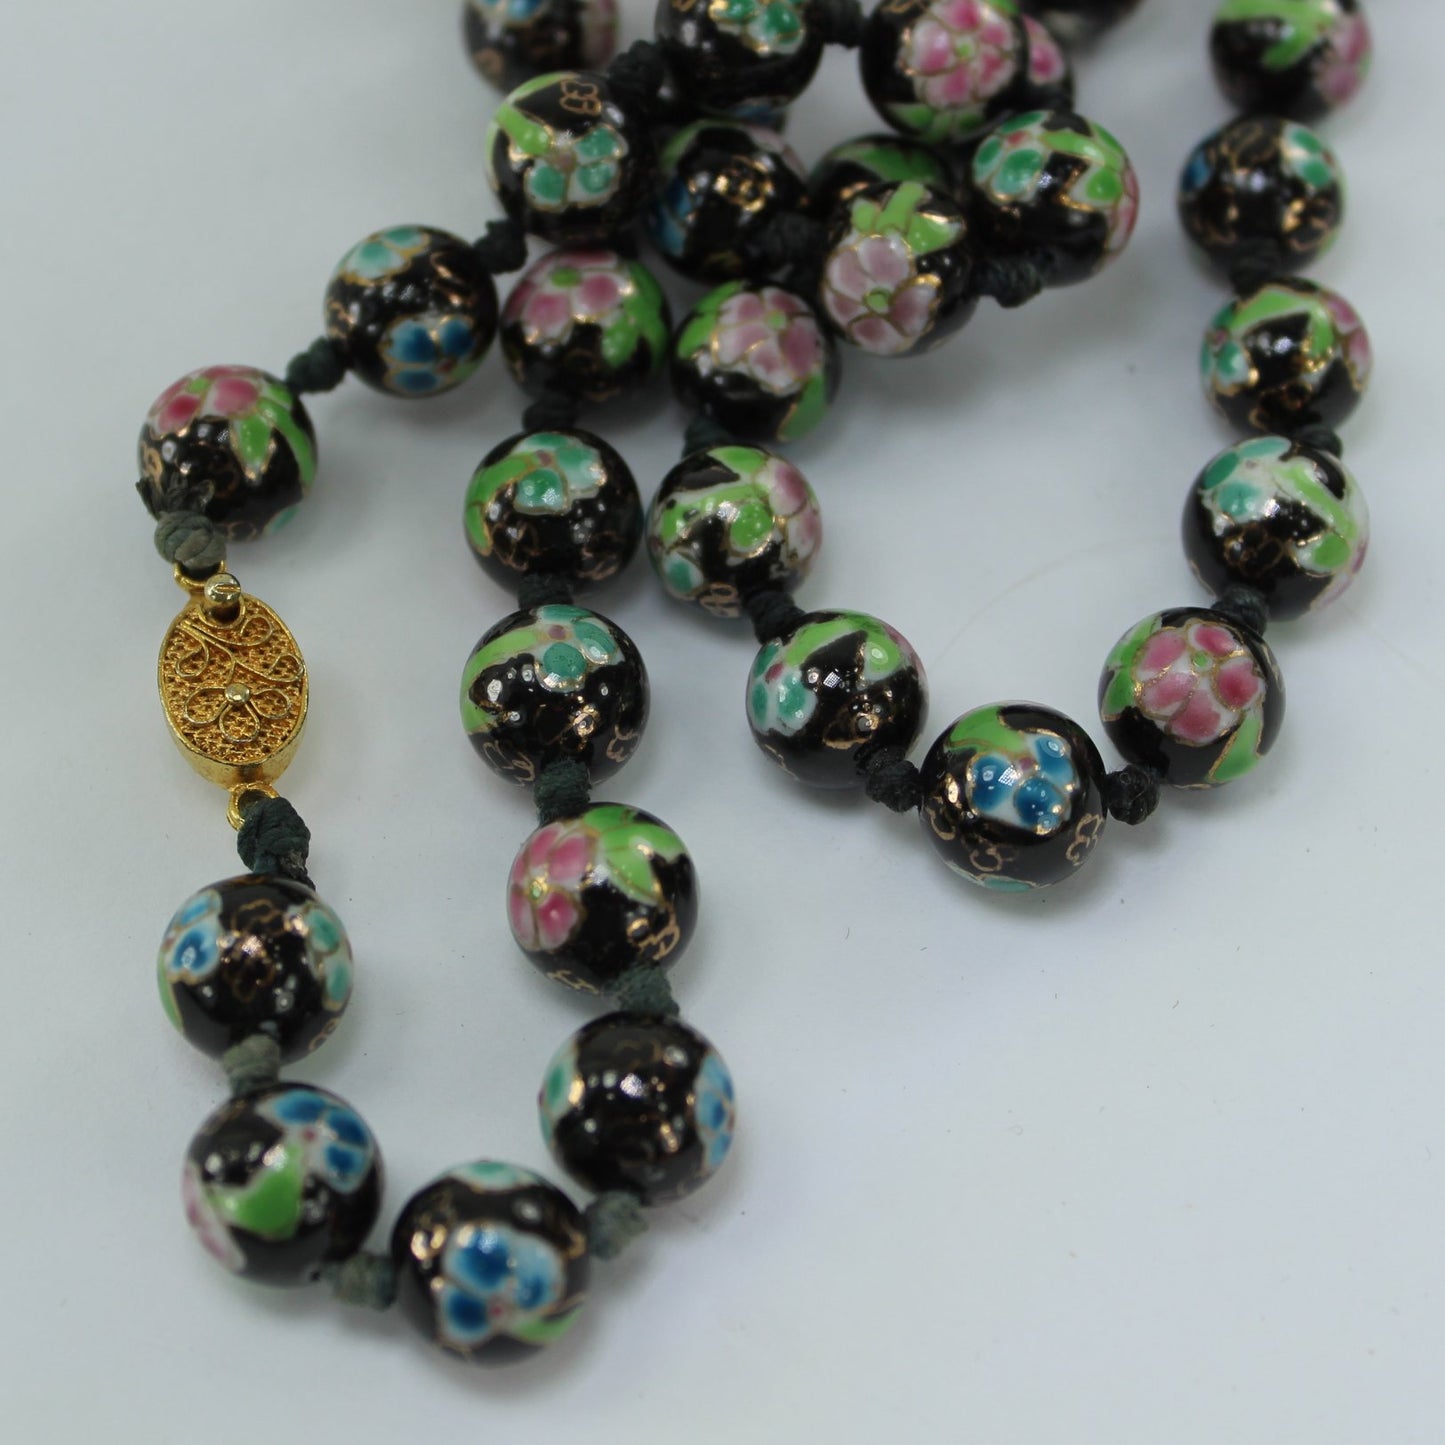 Older Cloisonne Hand Knotted Necklace 42 Beads 11mm Black Pink Blue very nice closure